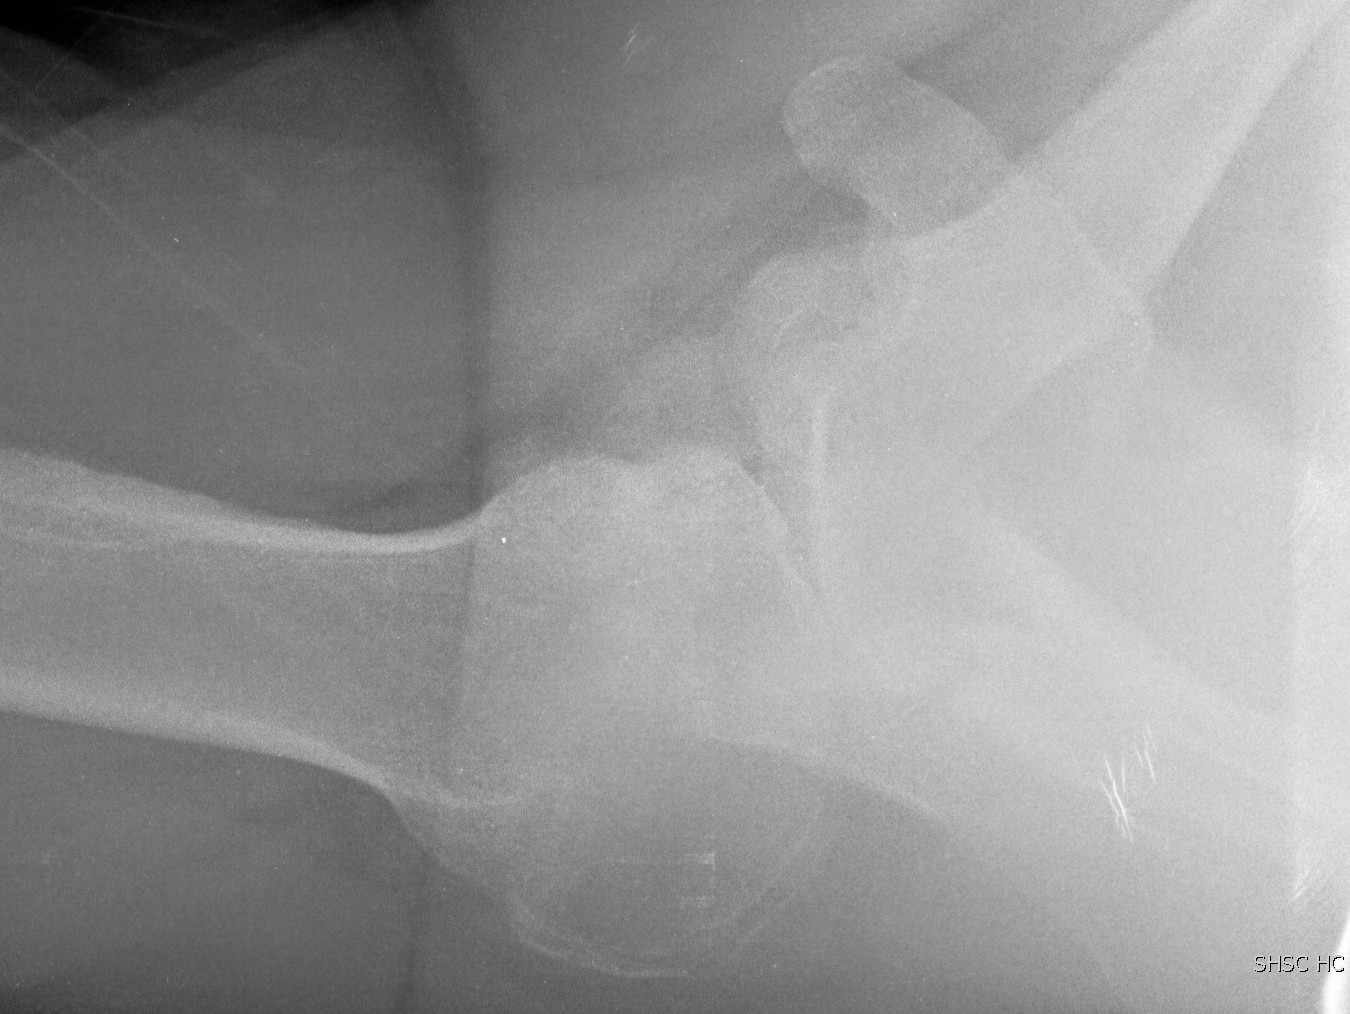 Axillary Lateral Posterior Subluxation